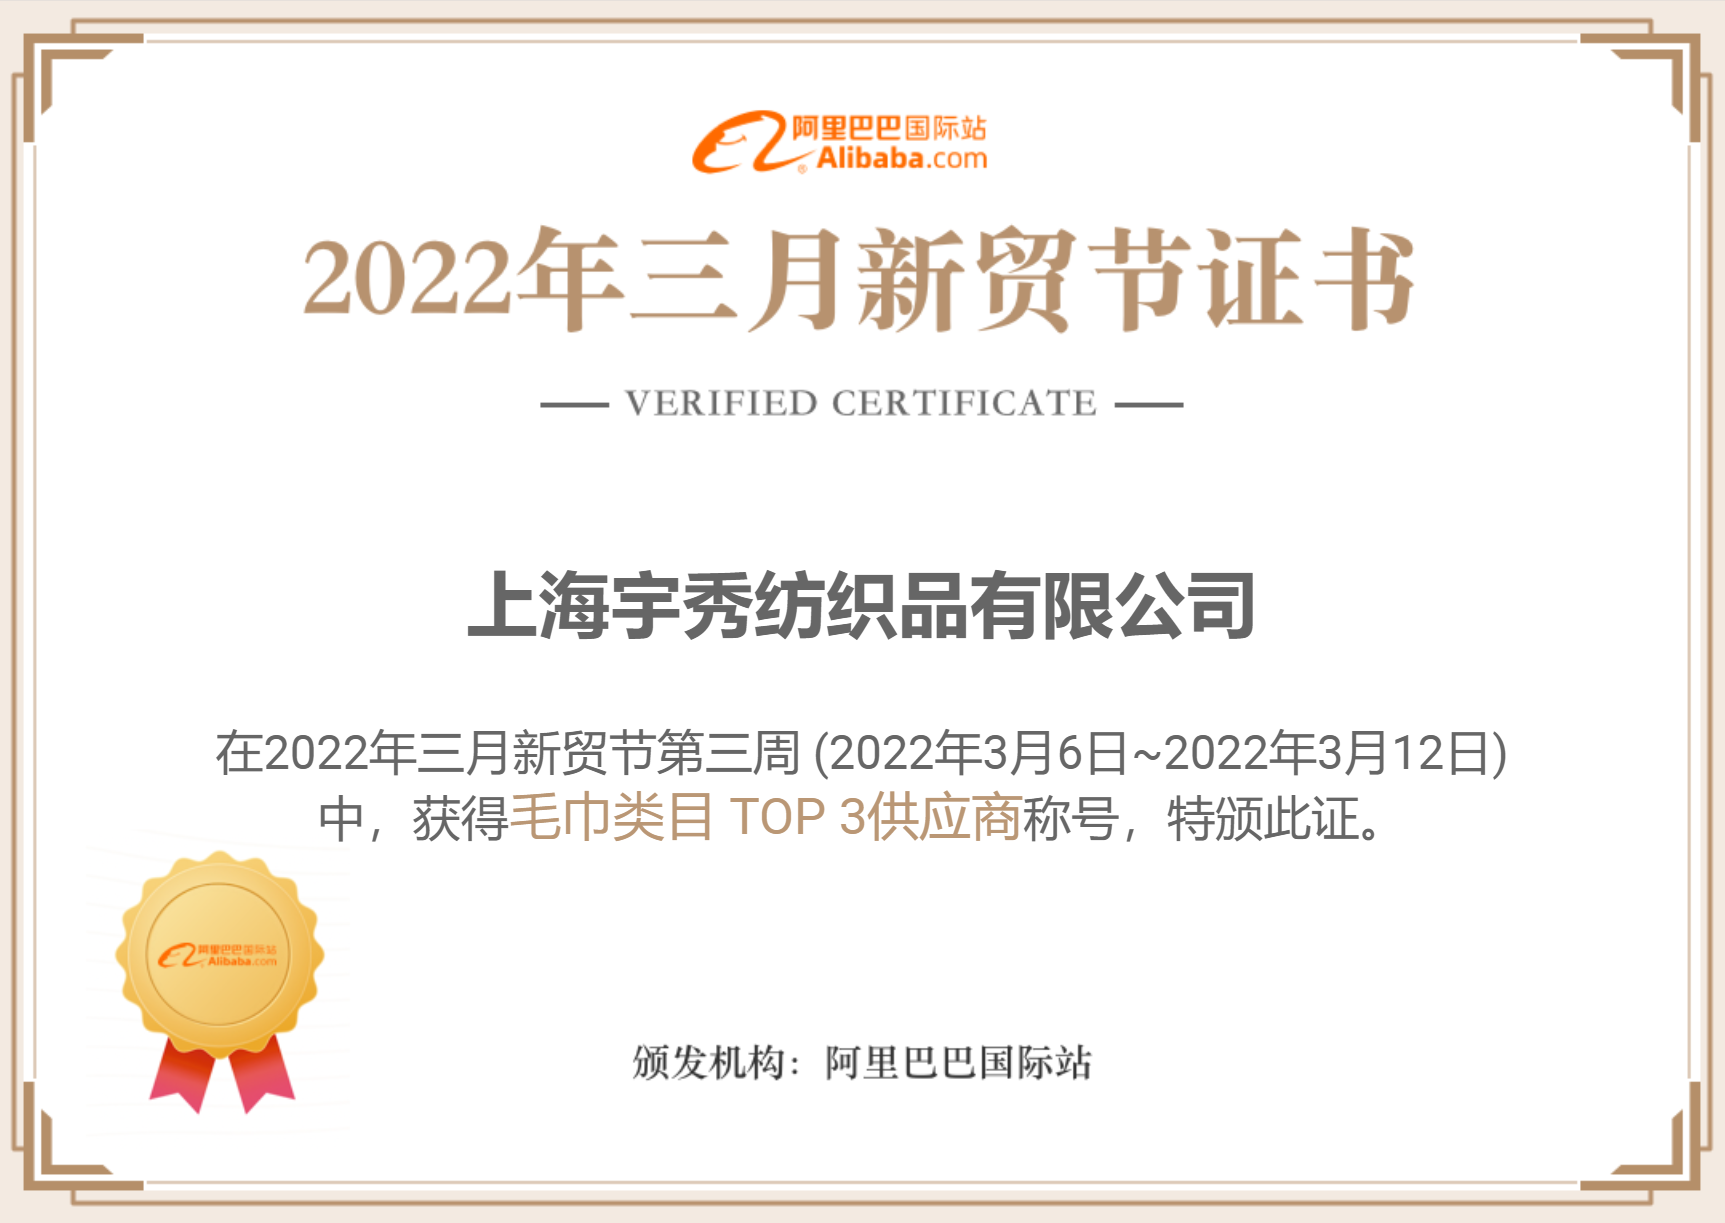 Top 3 Towels Supplier Granted by the Alibaba Group